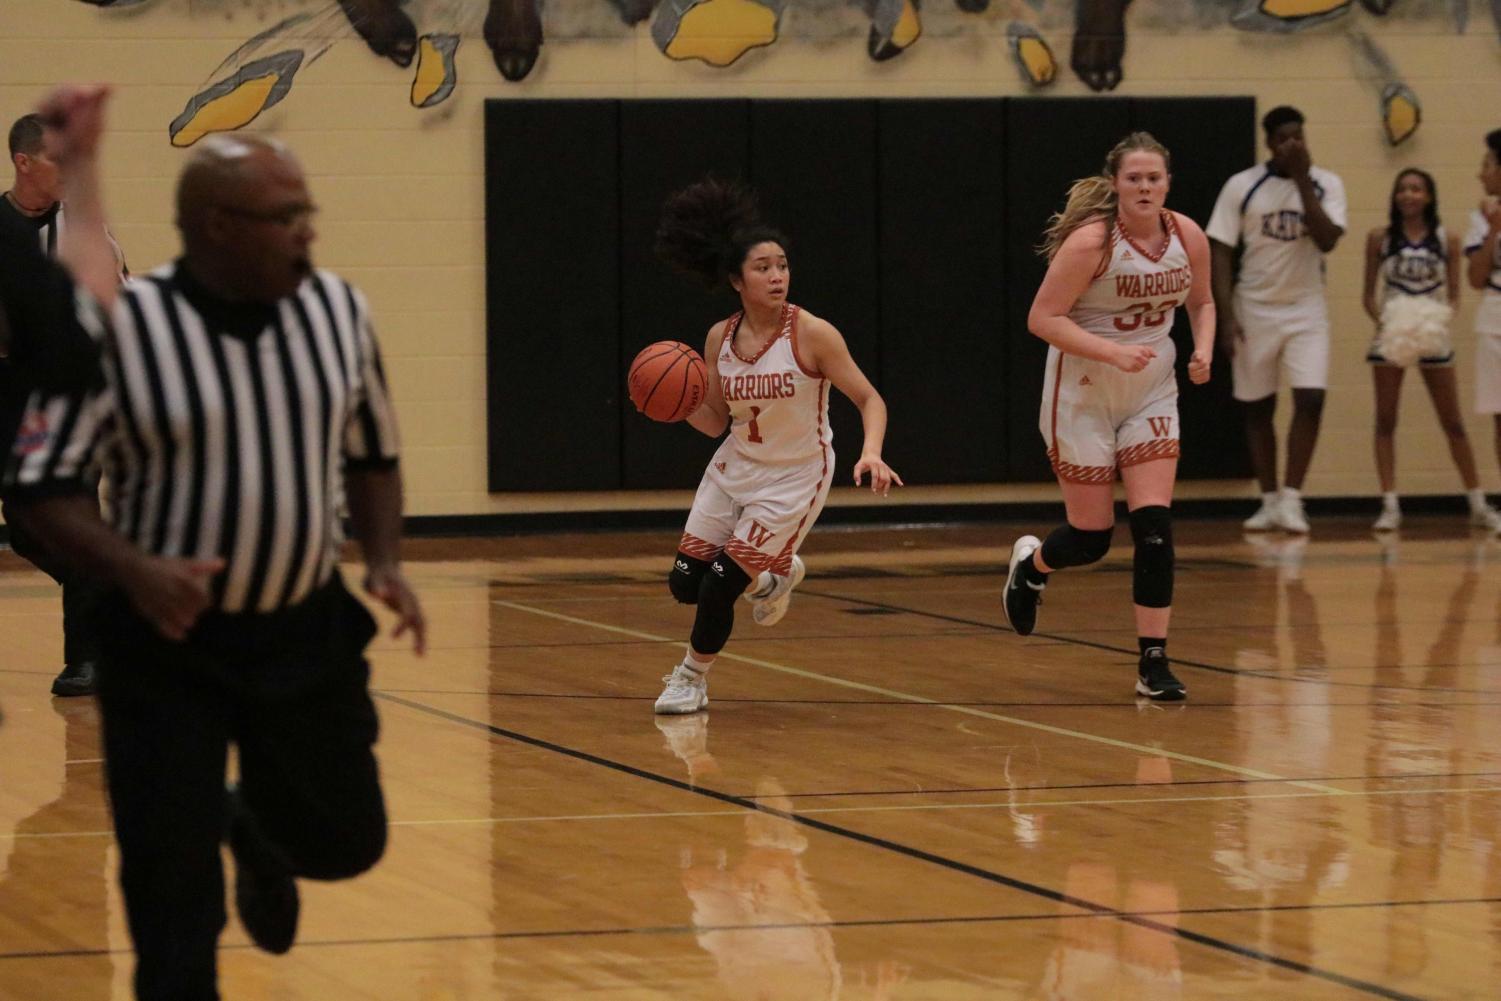 Varsity+Girls+Basketball+Defeats+Klein+and+Moves+to+Third+Round+of+Playoffs